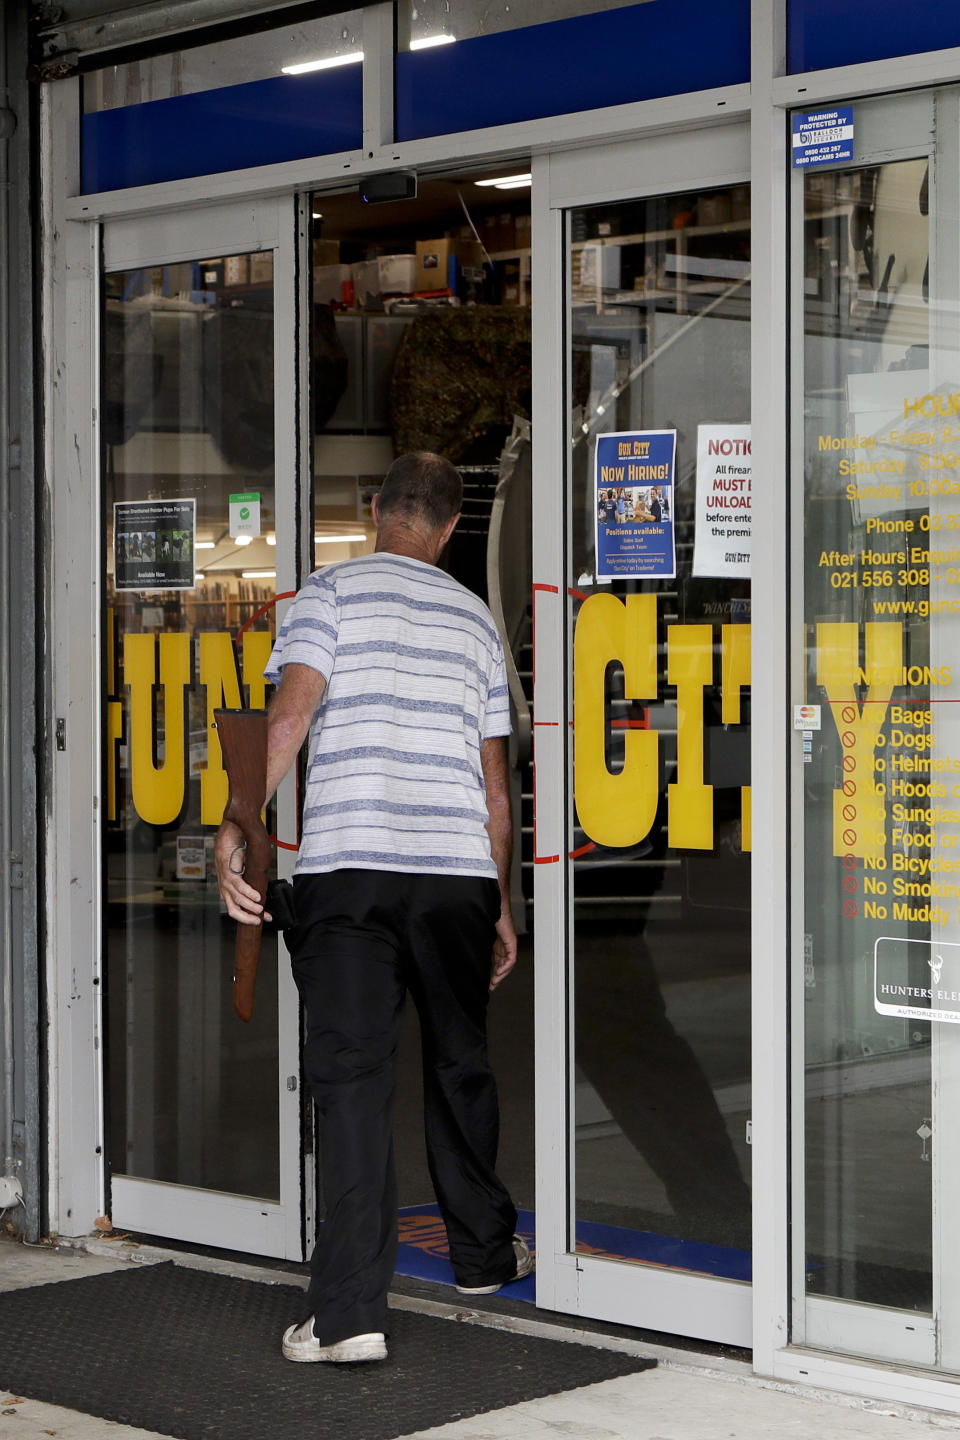 Ian Britton walks into a gun shop in Christchurch, New Zealand, Sunday, March 17, 2019. Gun ownership in New Zealand is being discussed after a mass shooting at two area mosques. (AP Photo/Mark Baker)